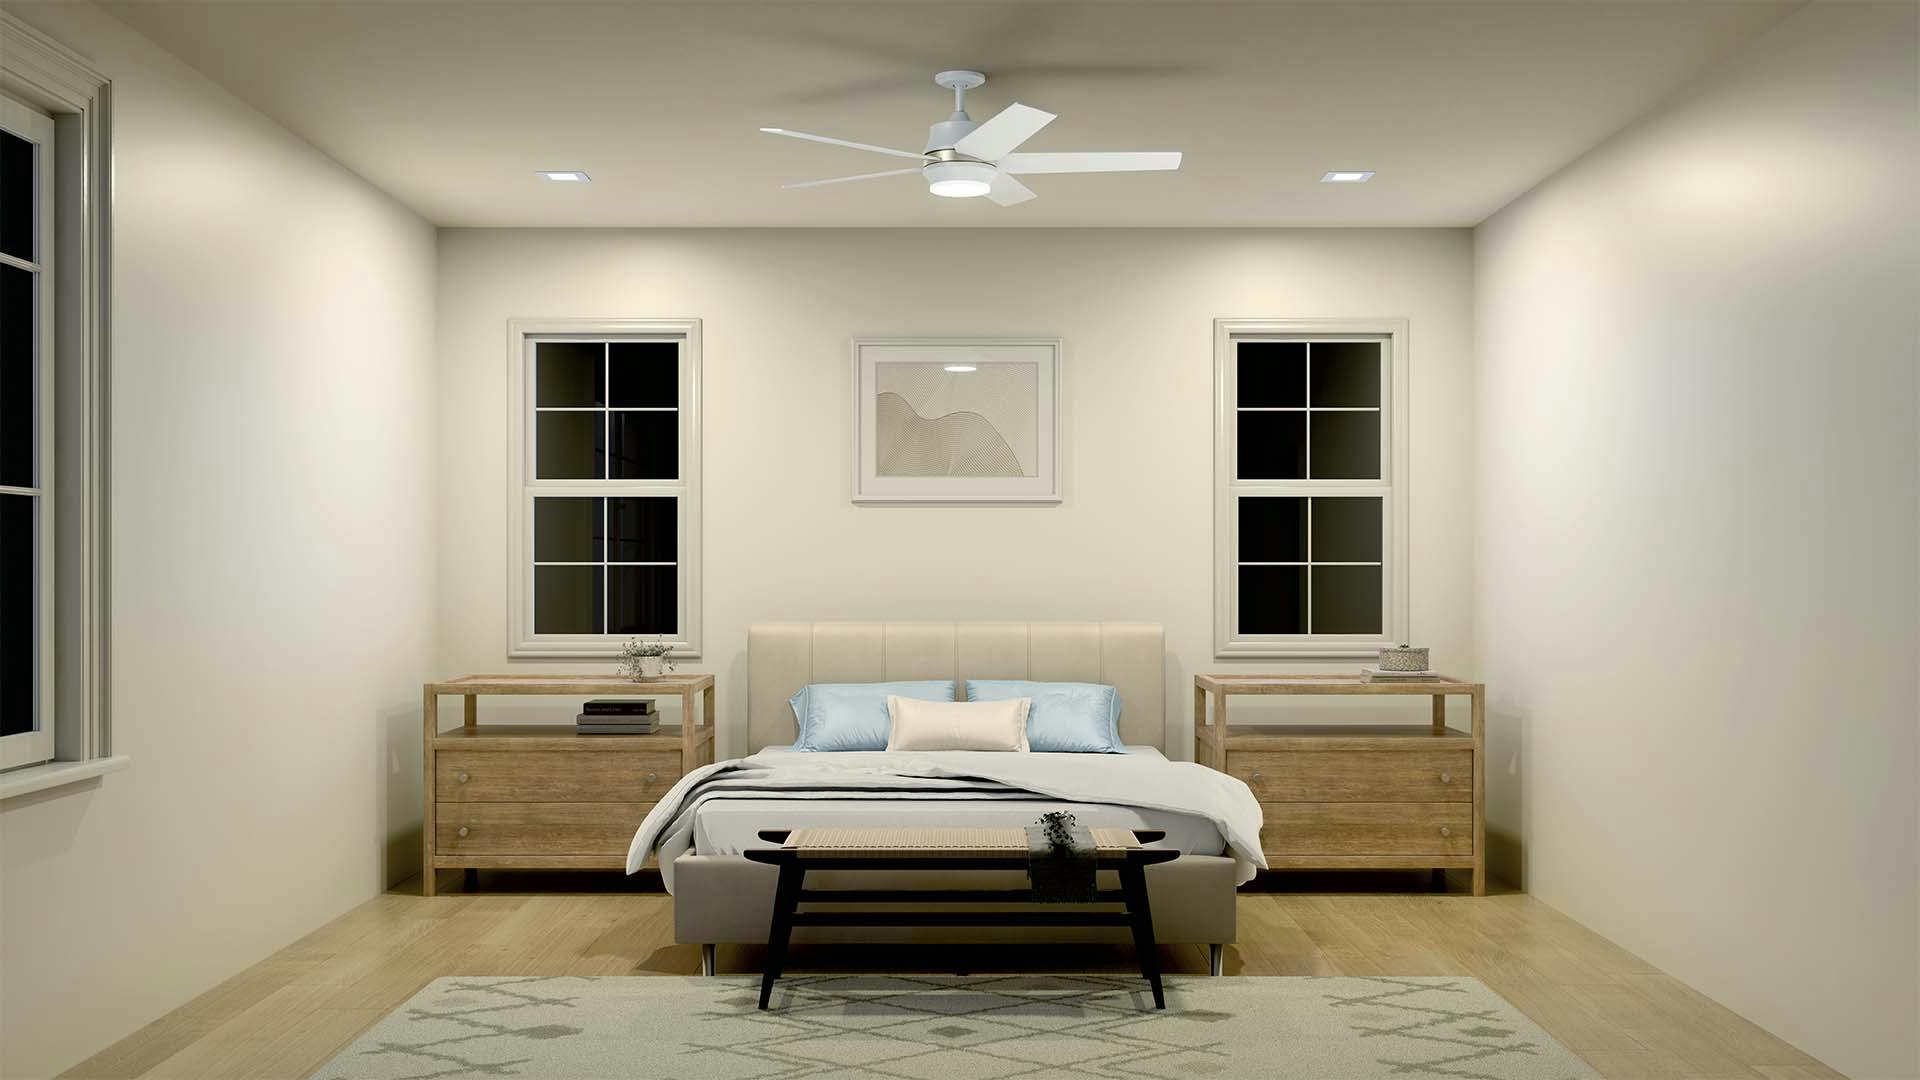 Bedroom with Maeve ceiling fan